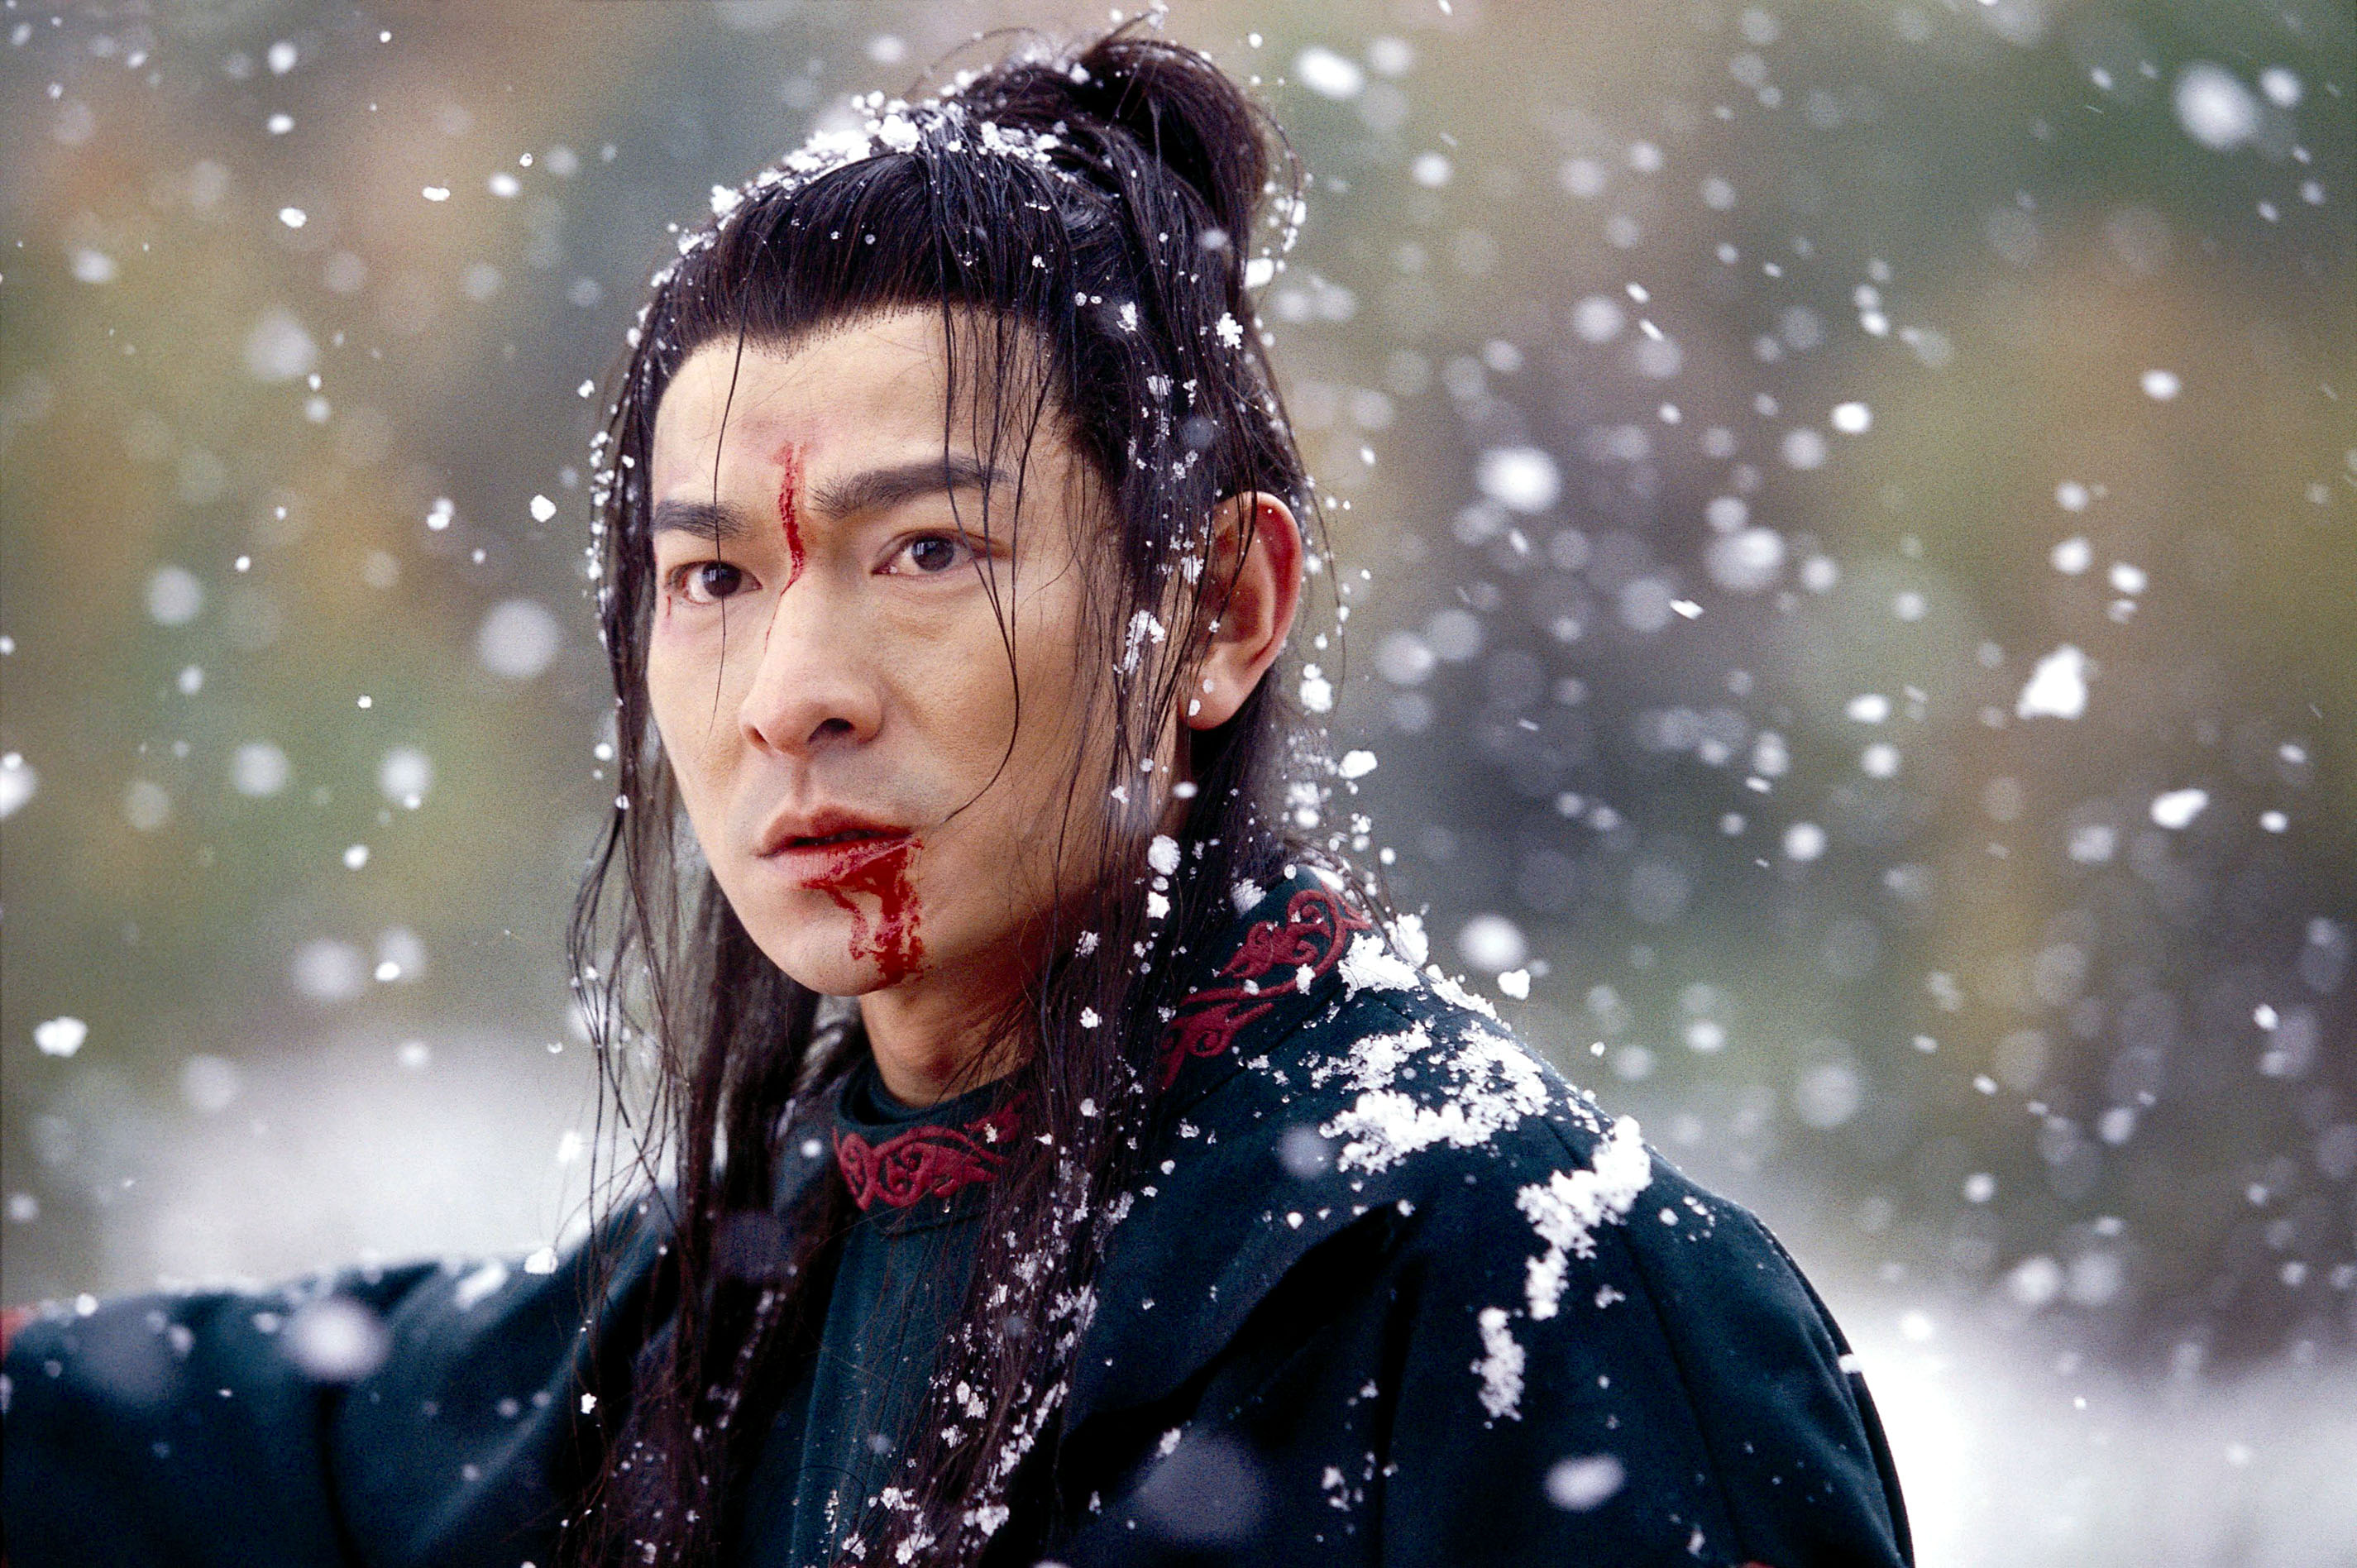 HOUSE OF FLYING DAGGERS, (aka SHI MIAN MAI FU), Andy Lau, 2004, (c) Sony Pictures Classics/courtesy Everett Collection